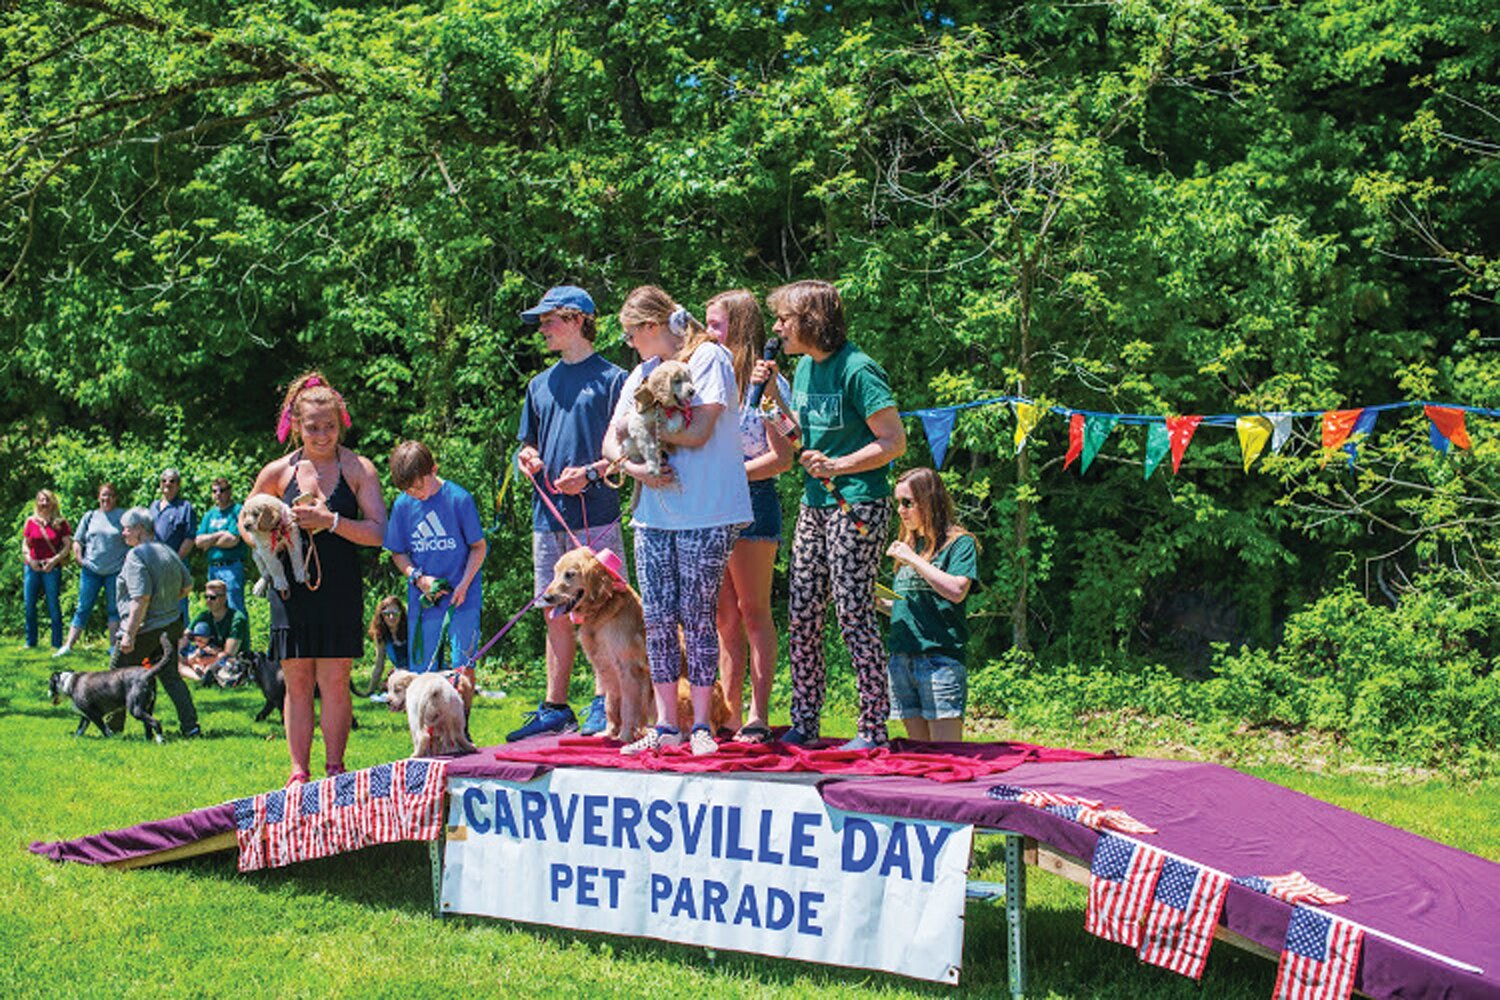 Carversville Day will once again host contests for pets on May 13.